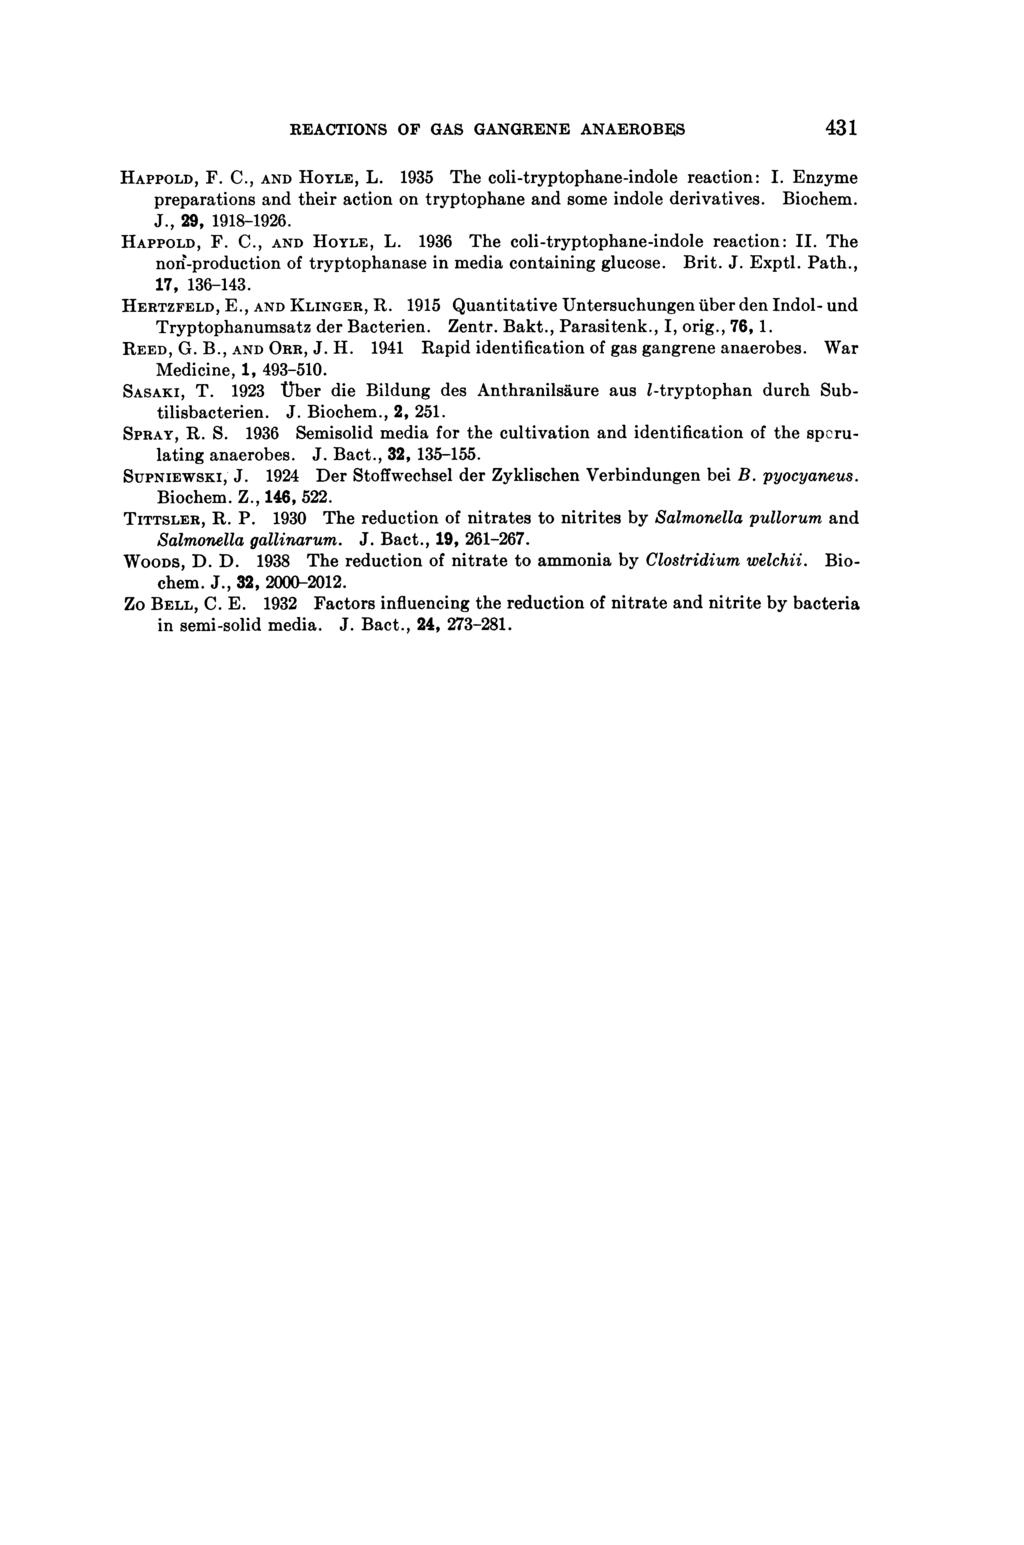 REACTIONS OF GAS GANGRENE ANAEROBES 431 HAPPOLD, F. C., AND HOYLE, L. 1935 The coli-tryptophane-indole reaction: I. Enzyme preparations and their action on tryptophane and some indole derivatives.